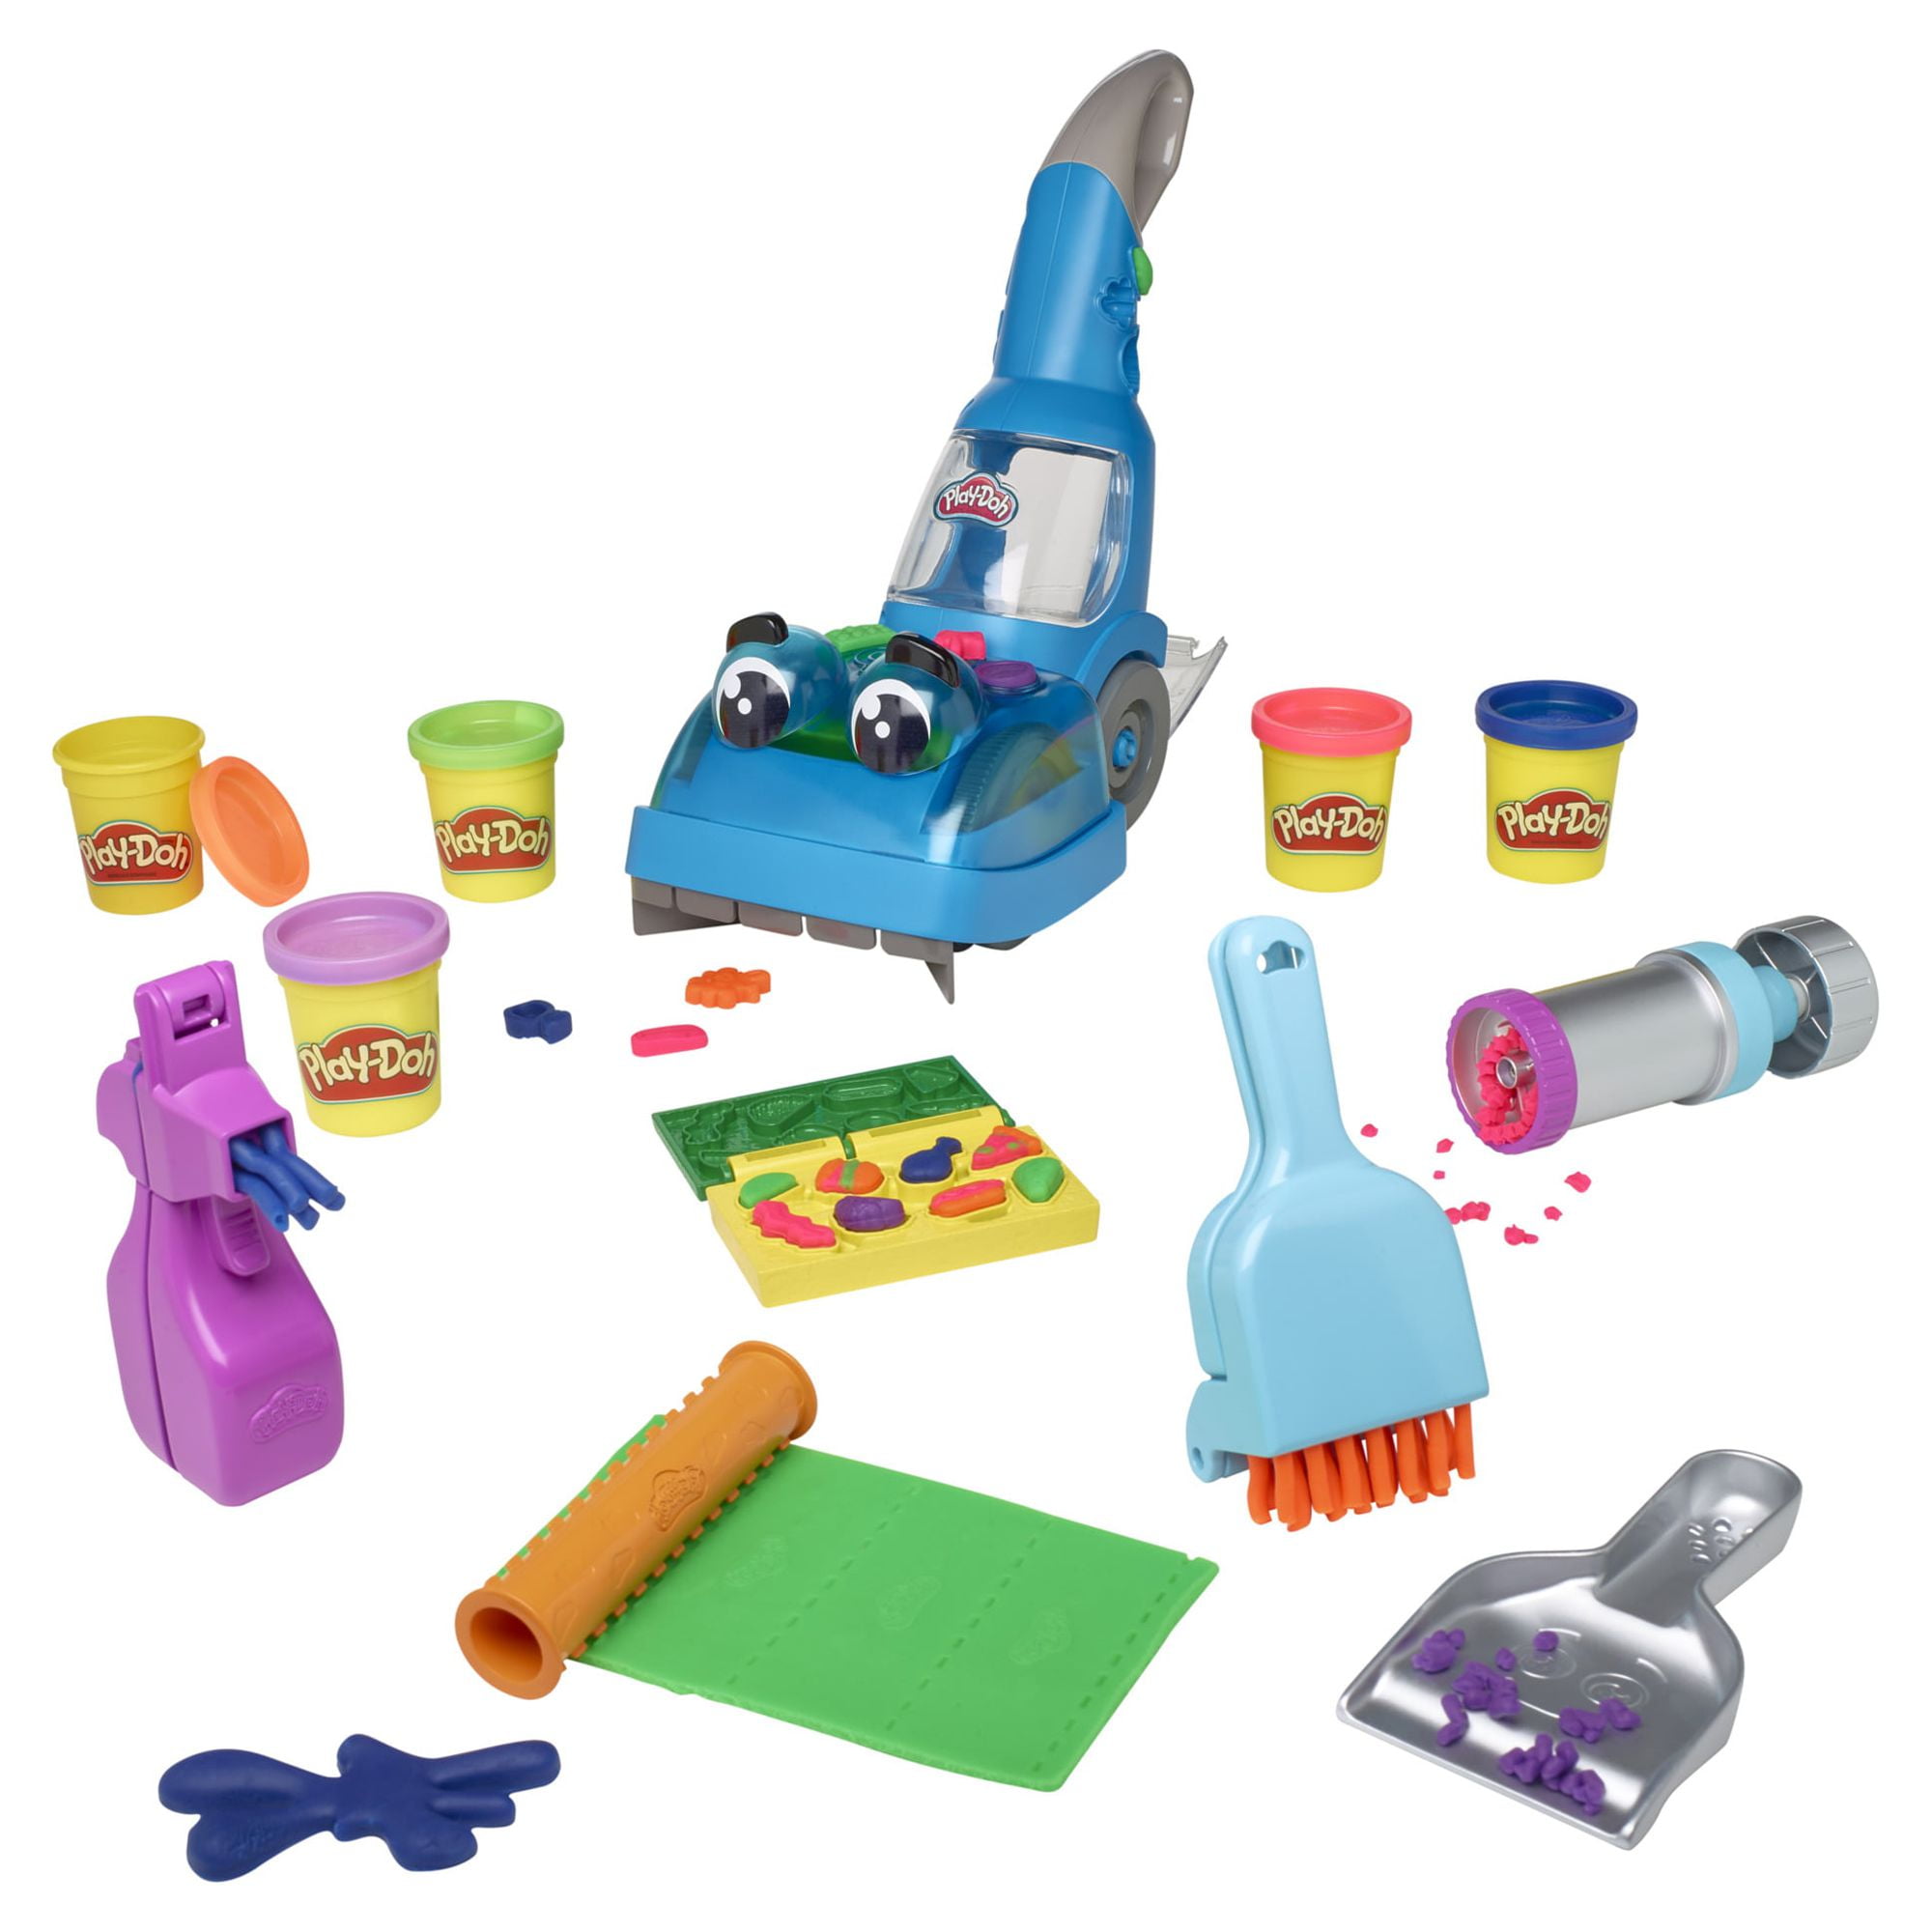 Play Doh Vacuum Cleaning: Assistant and Wiggles Tackle a Big Mess